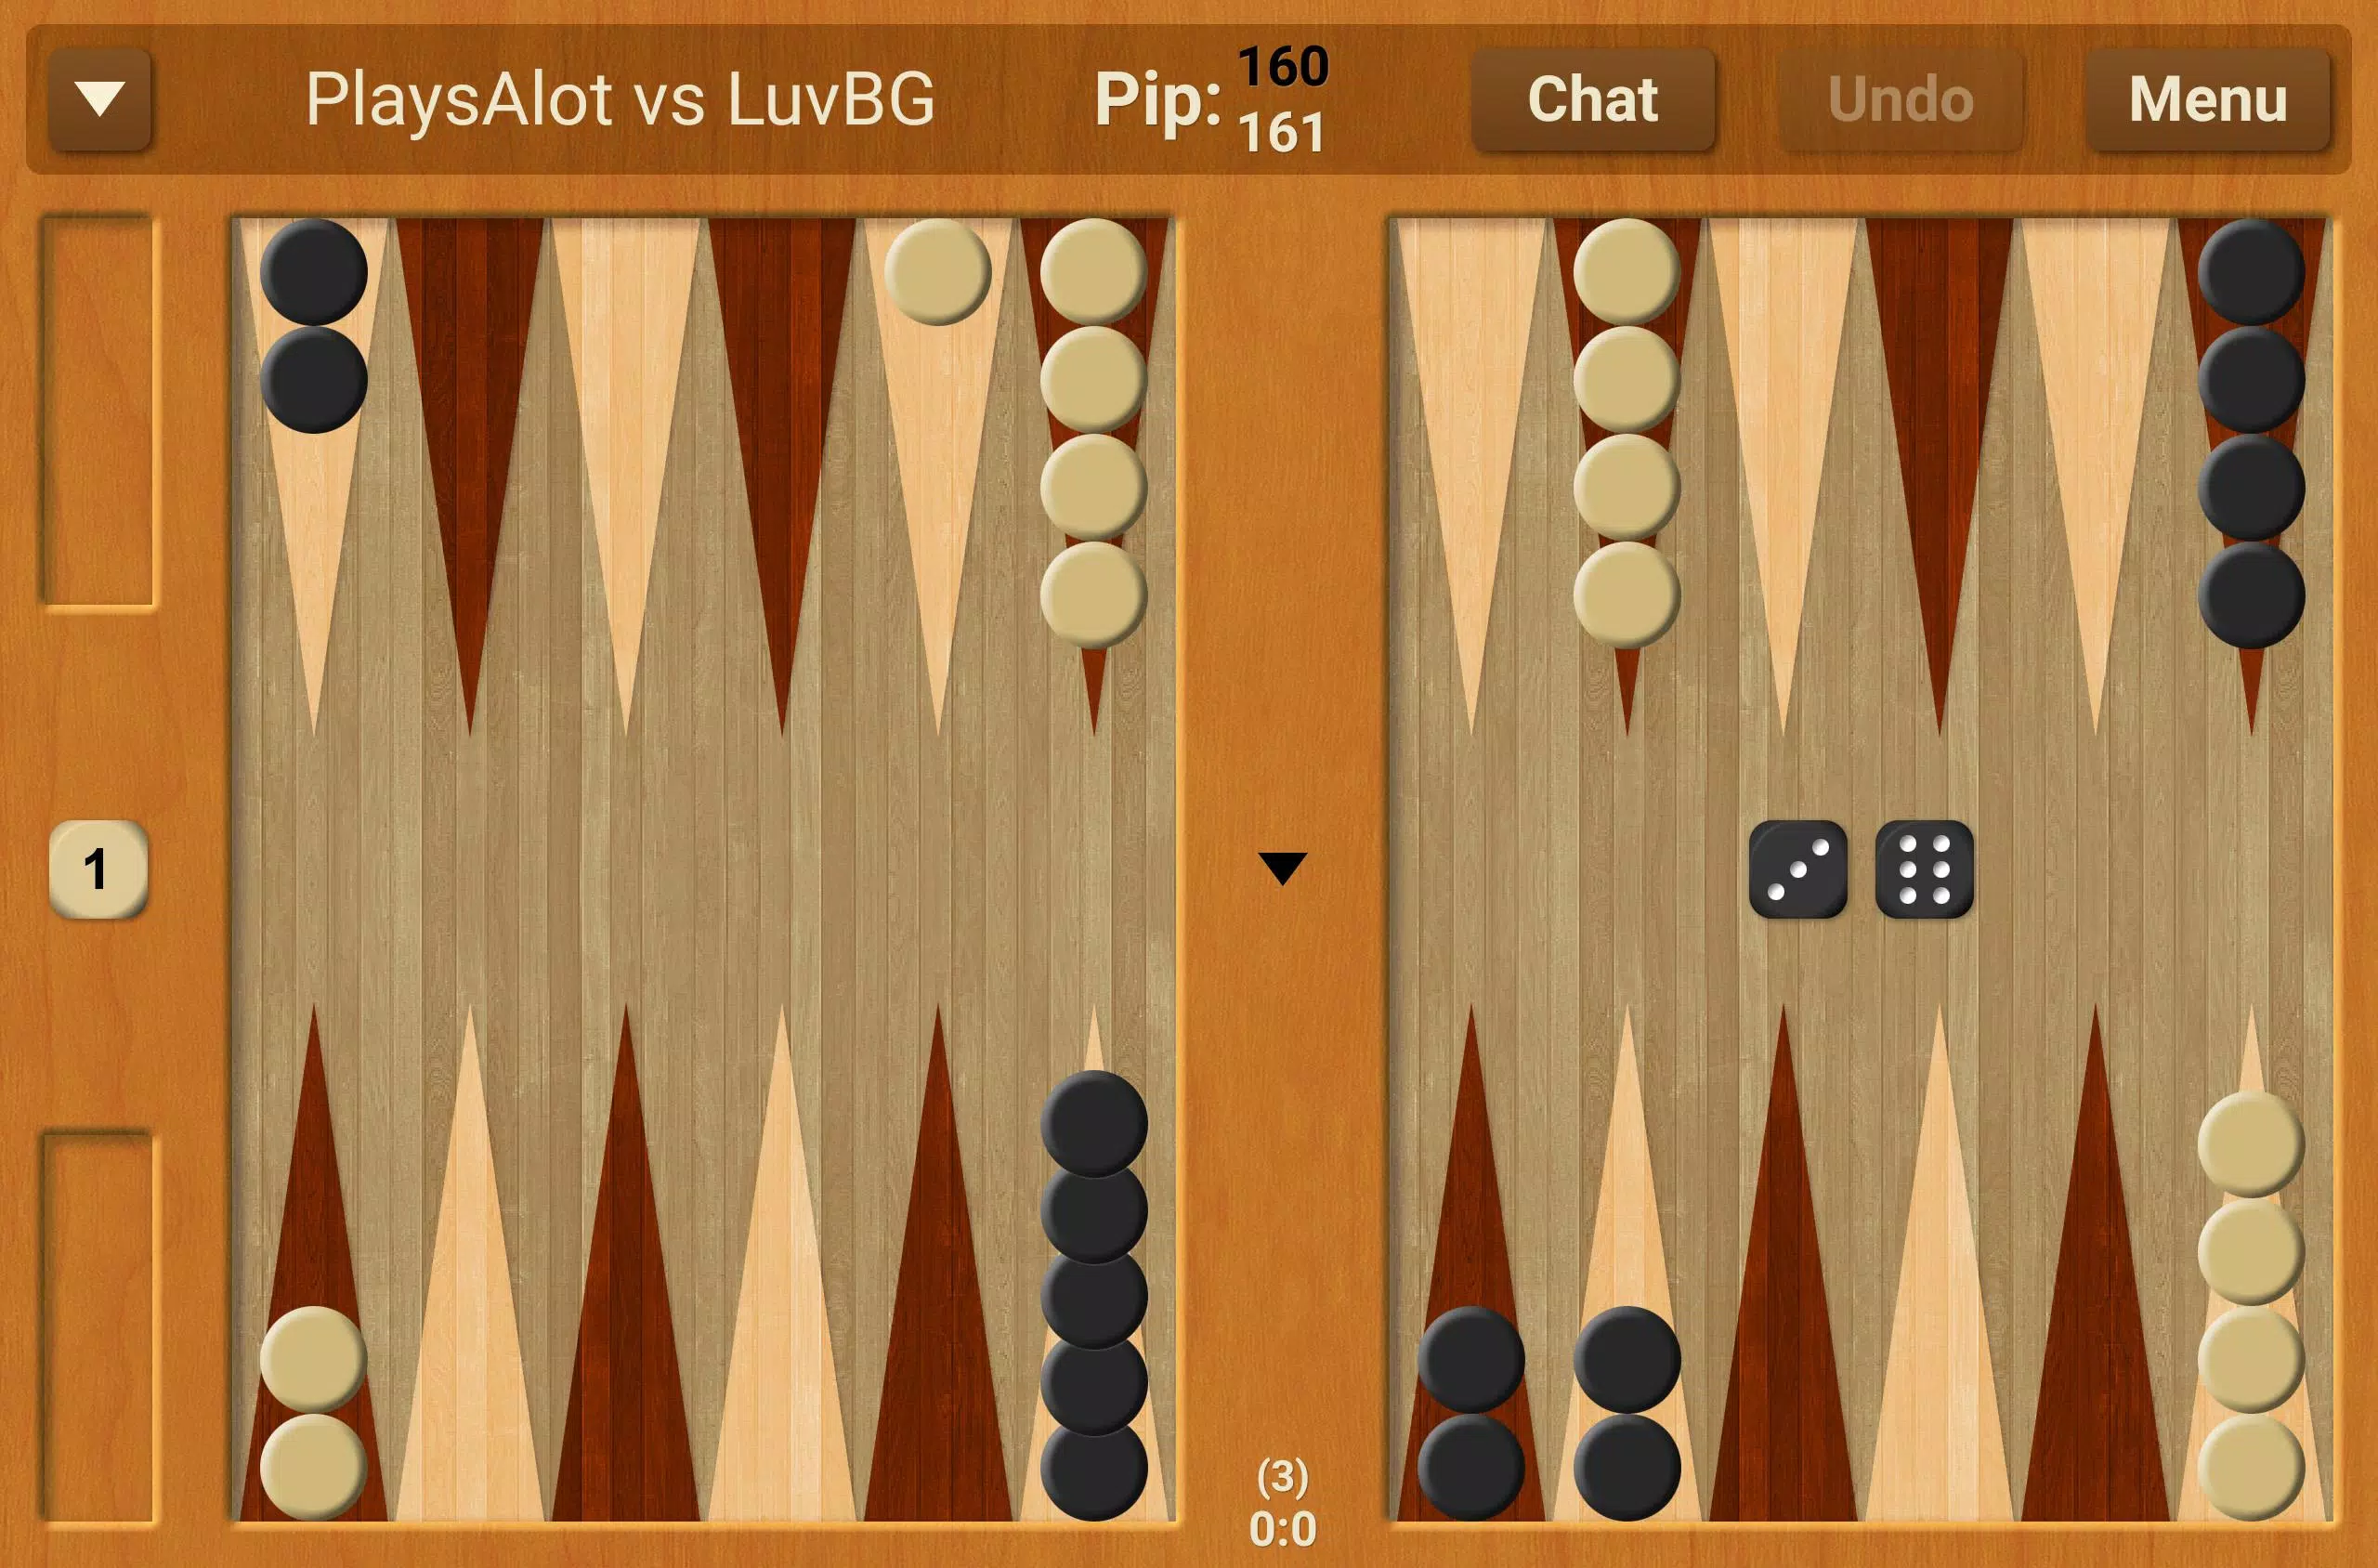 Backgammon Live - Online Games - Apps on Google Play